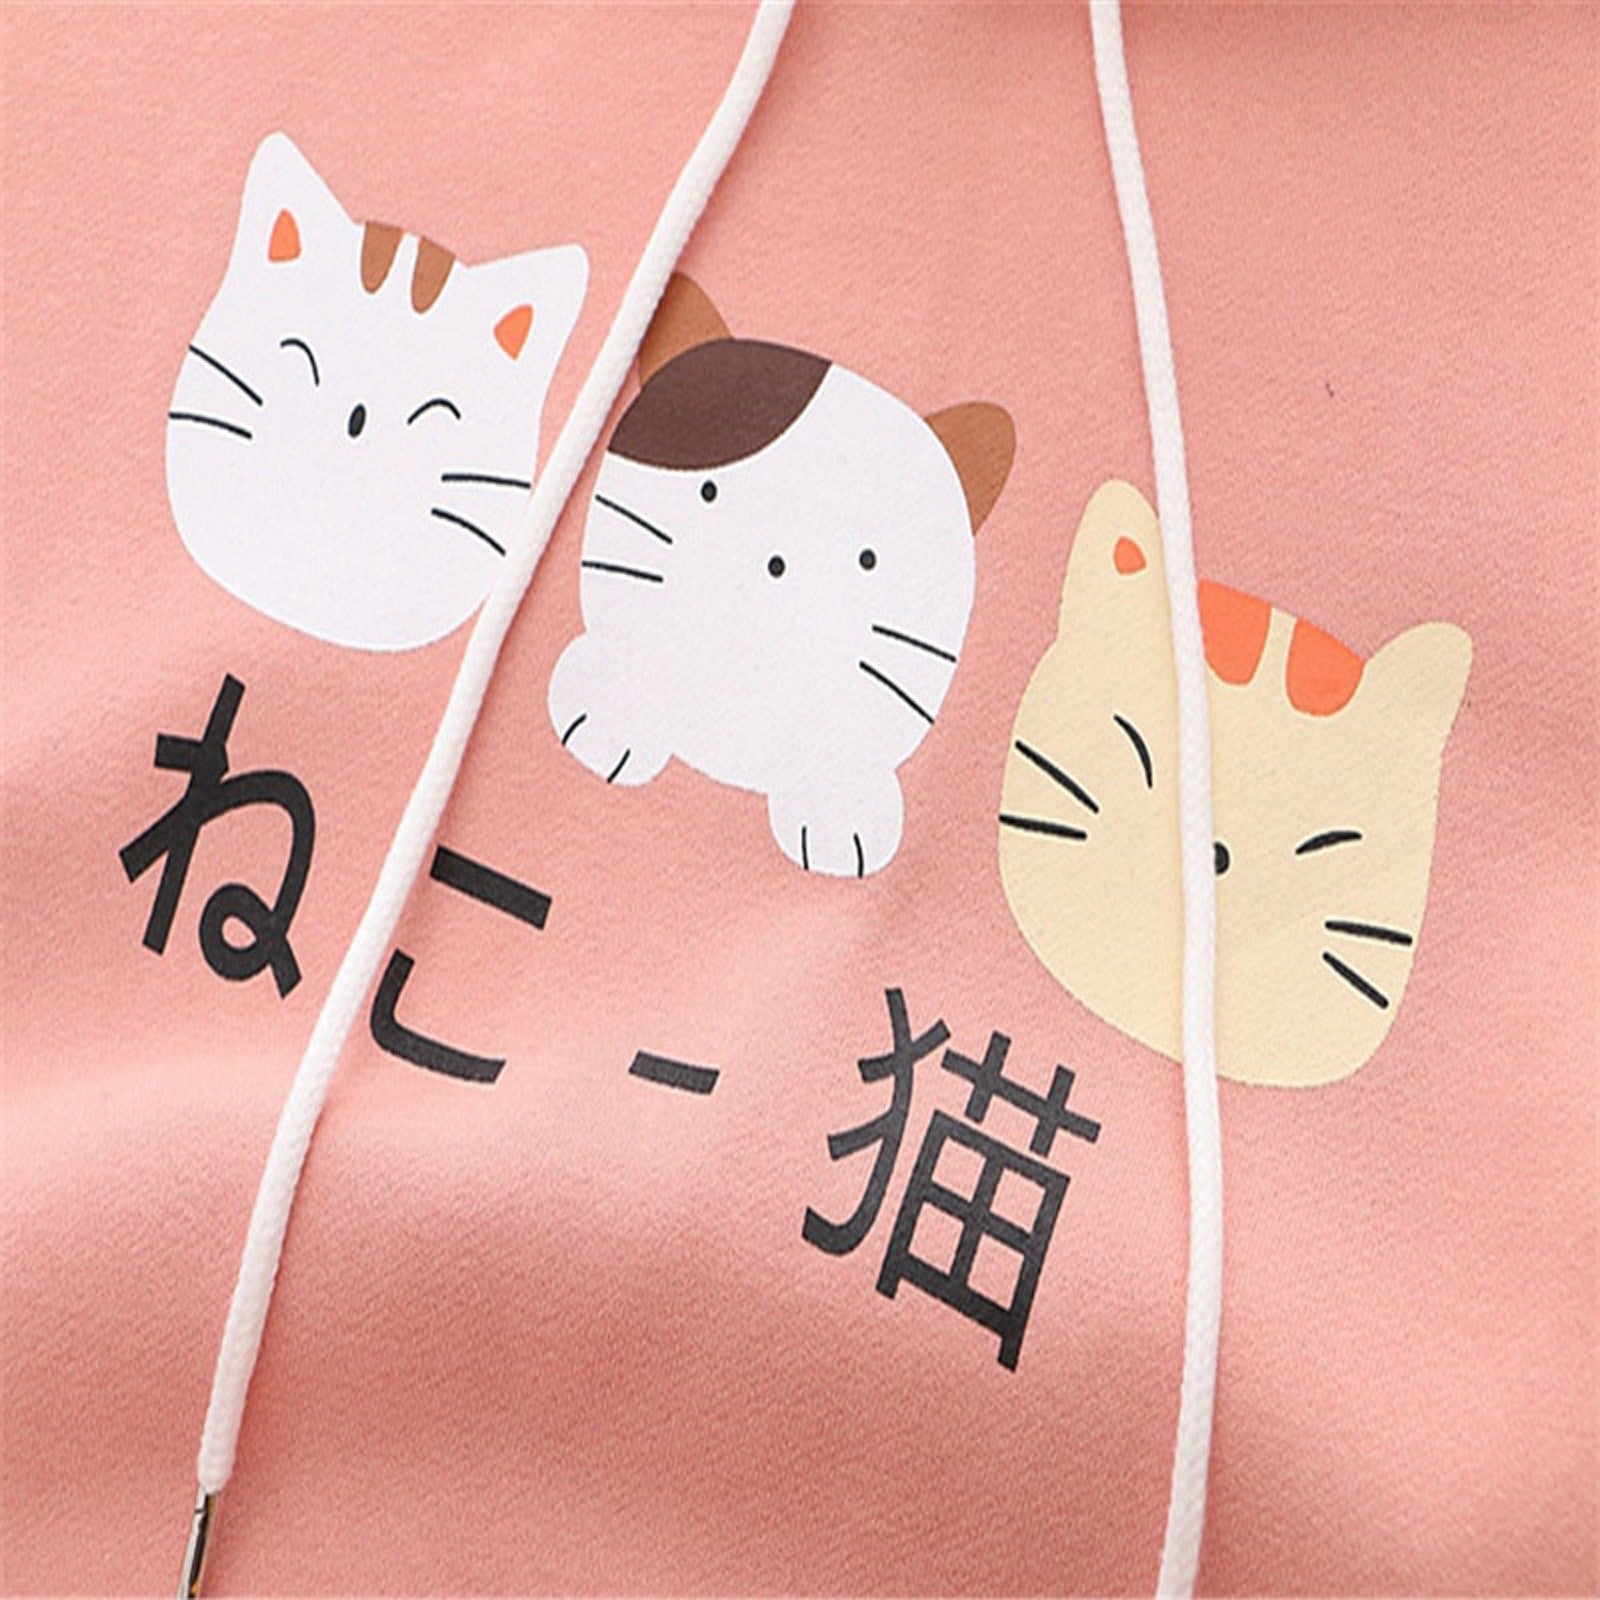 Whiskered Whimsy: Harajuku Cartoon Kitty Cat Letter Hoodie - Purr-fectly Cute Comfort! 🐾💖